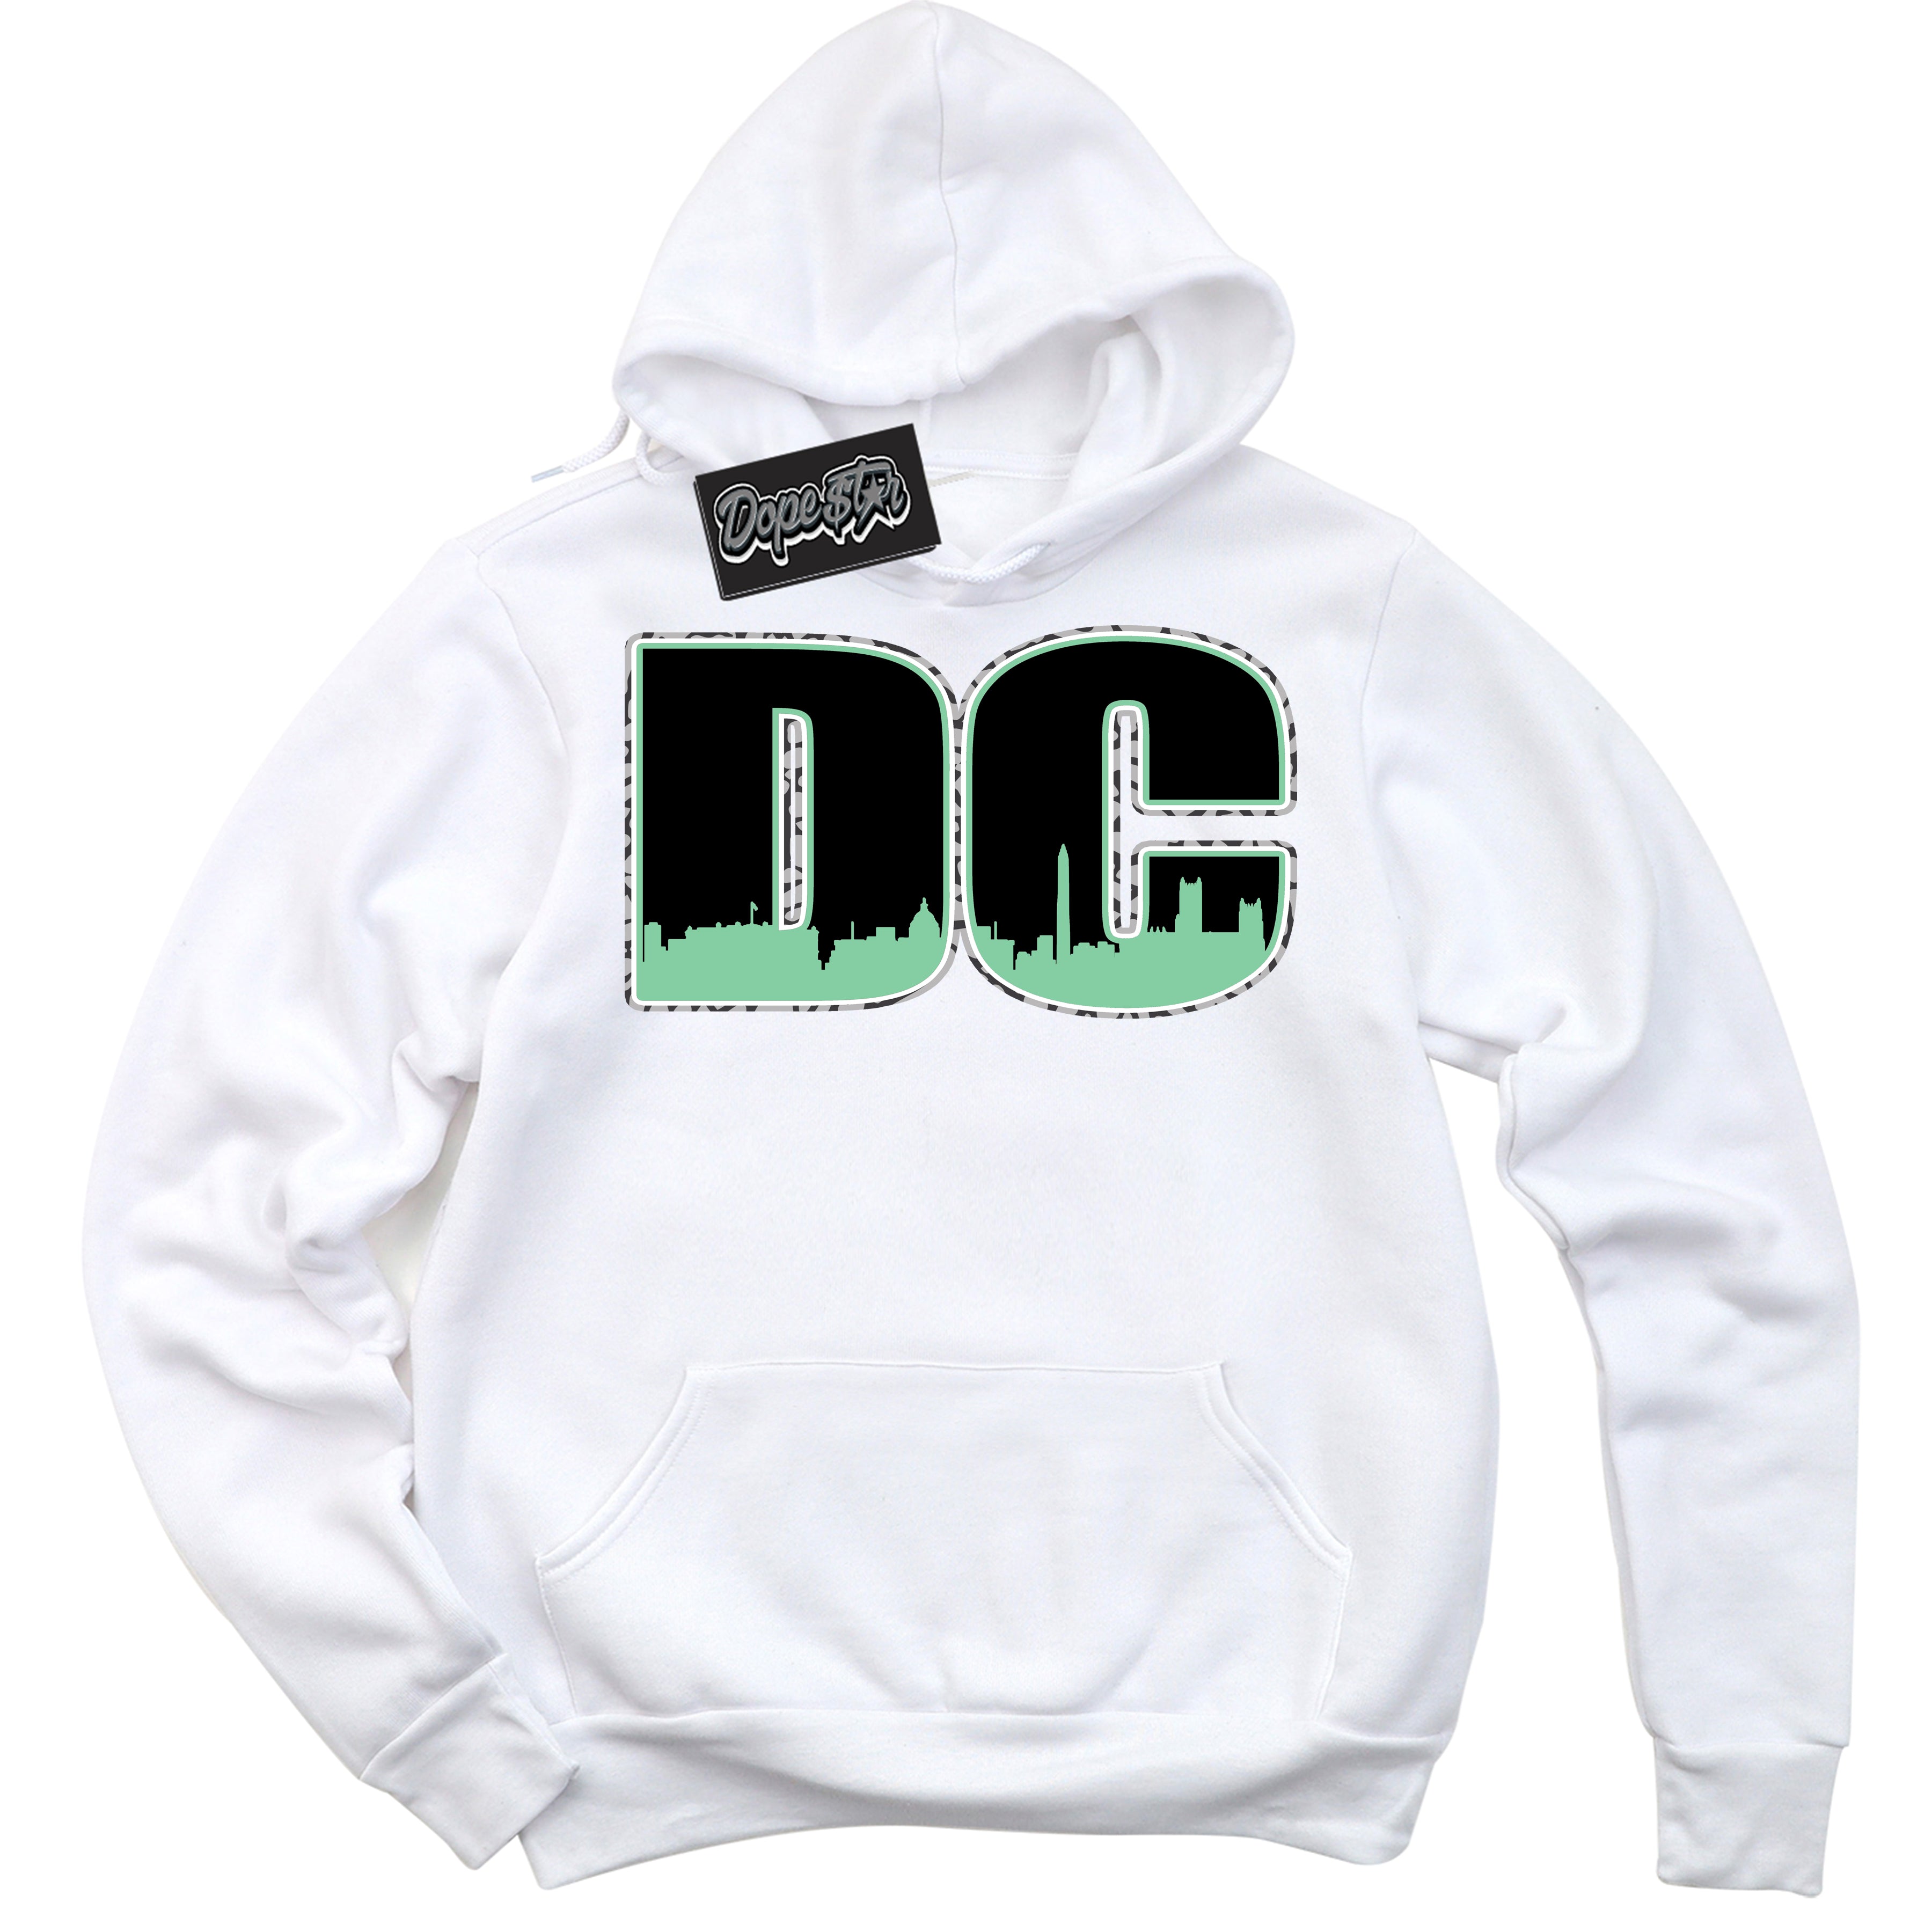 Cool White Graphic DopeStar Hoodie with “ DC “ print, that perfectly matches Green Glow 3s sneakers